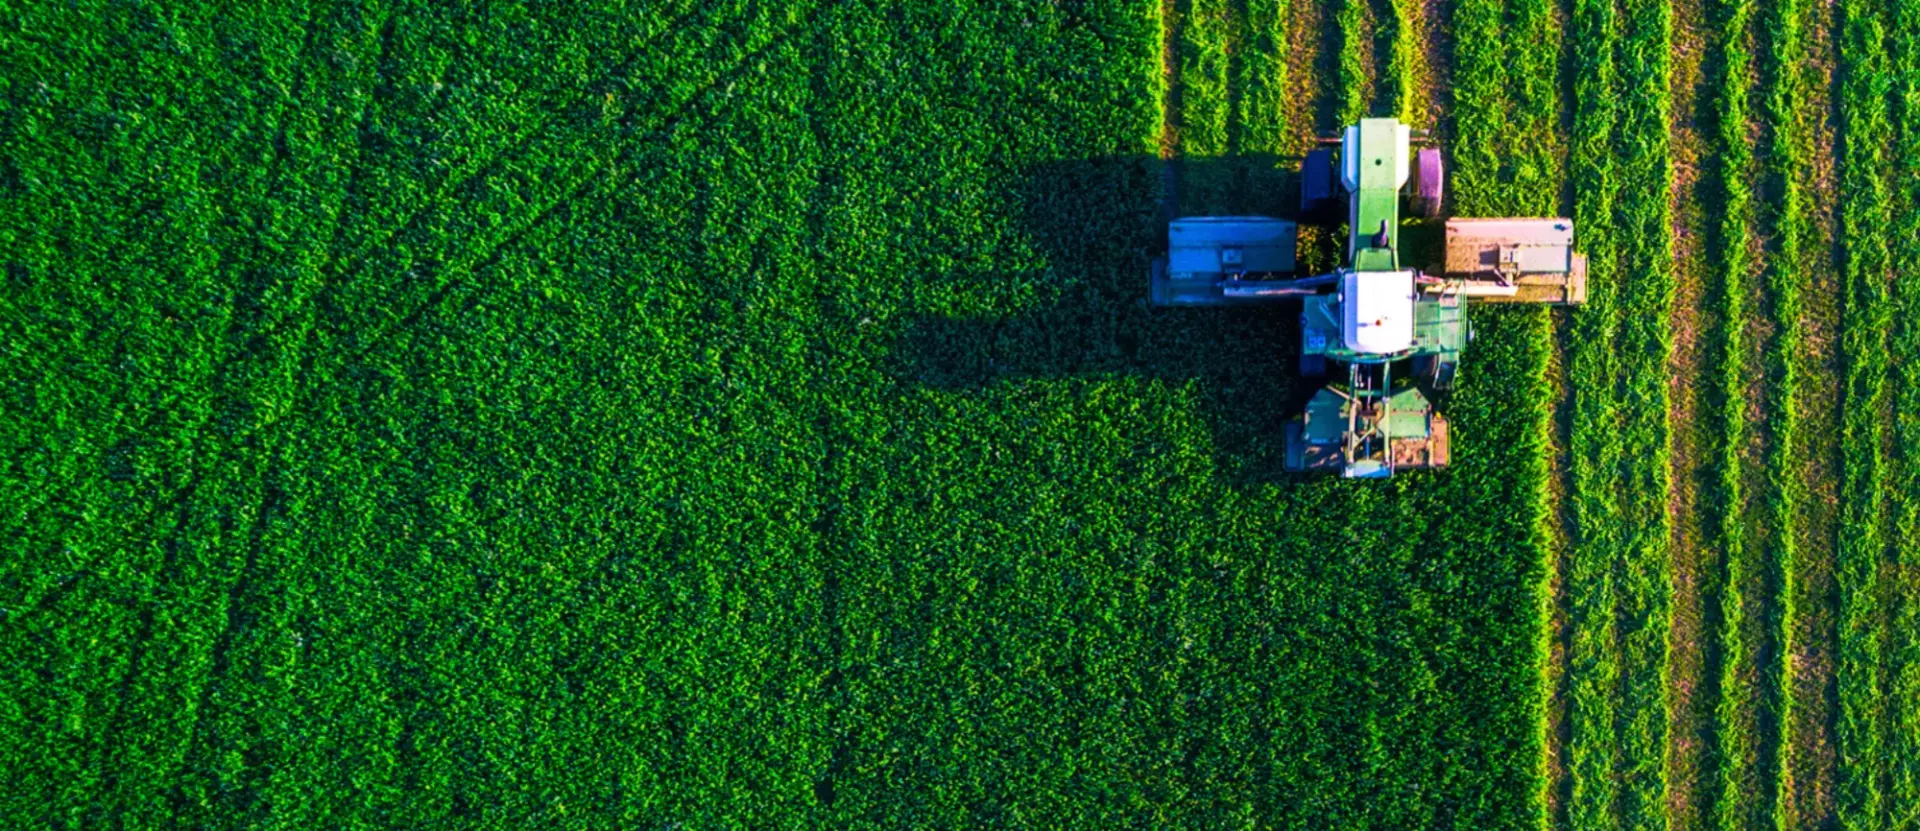 Overhead view of a green field with a tractor.